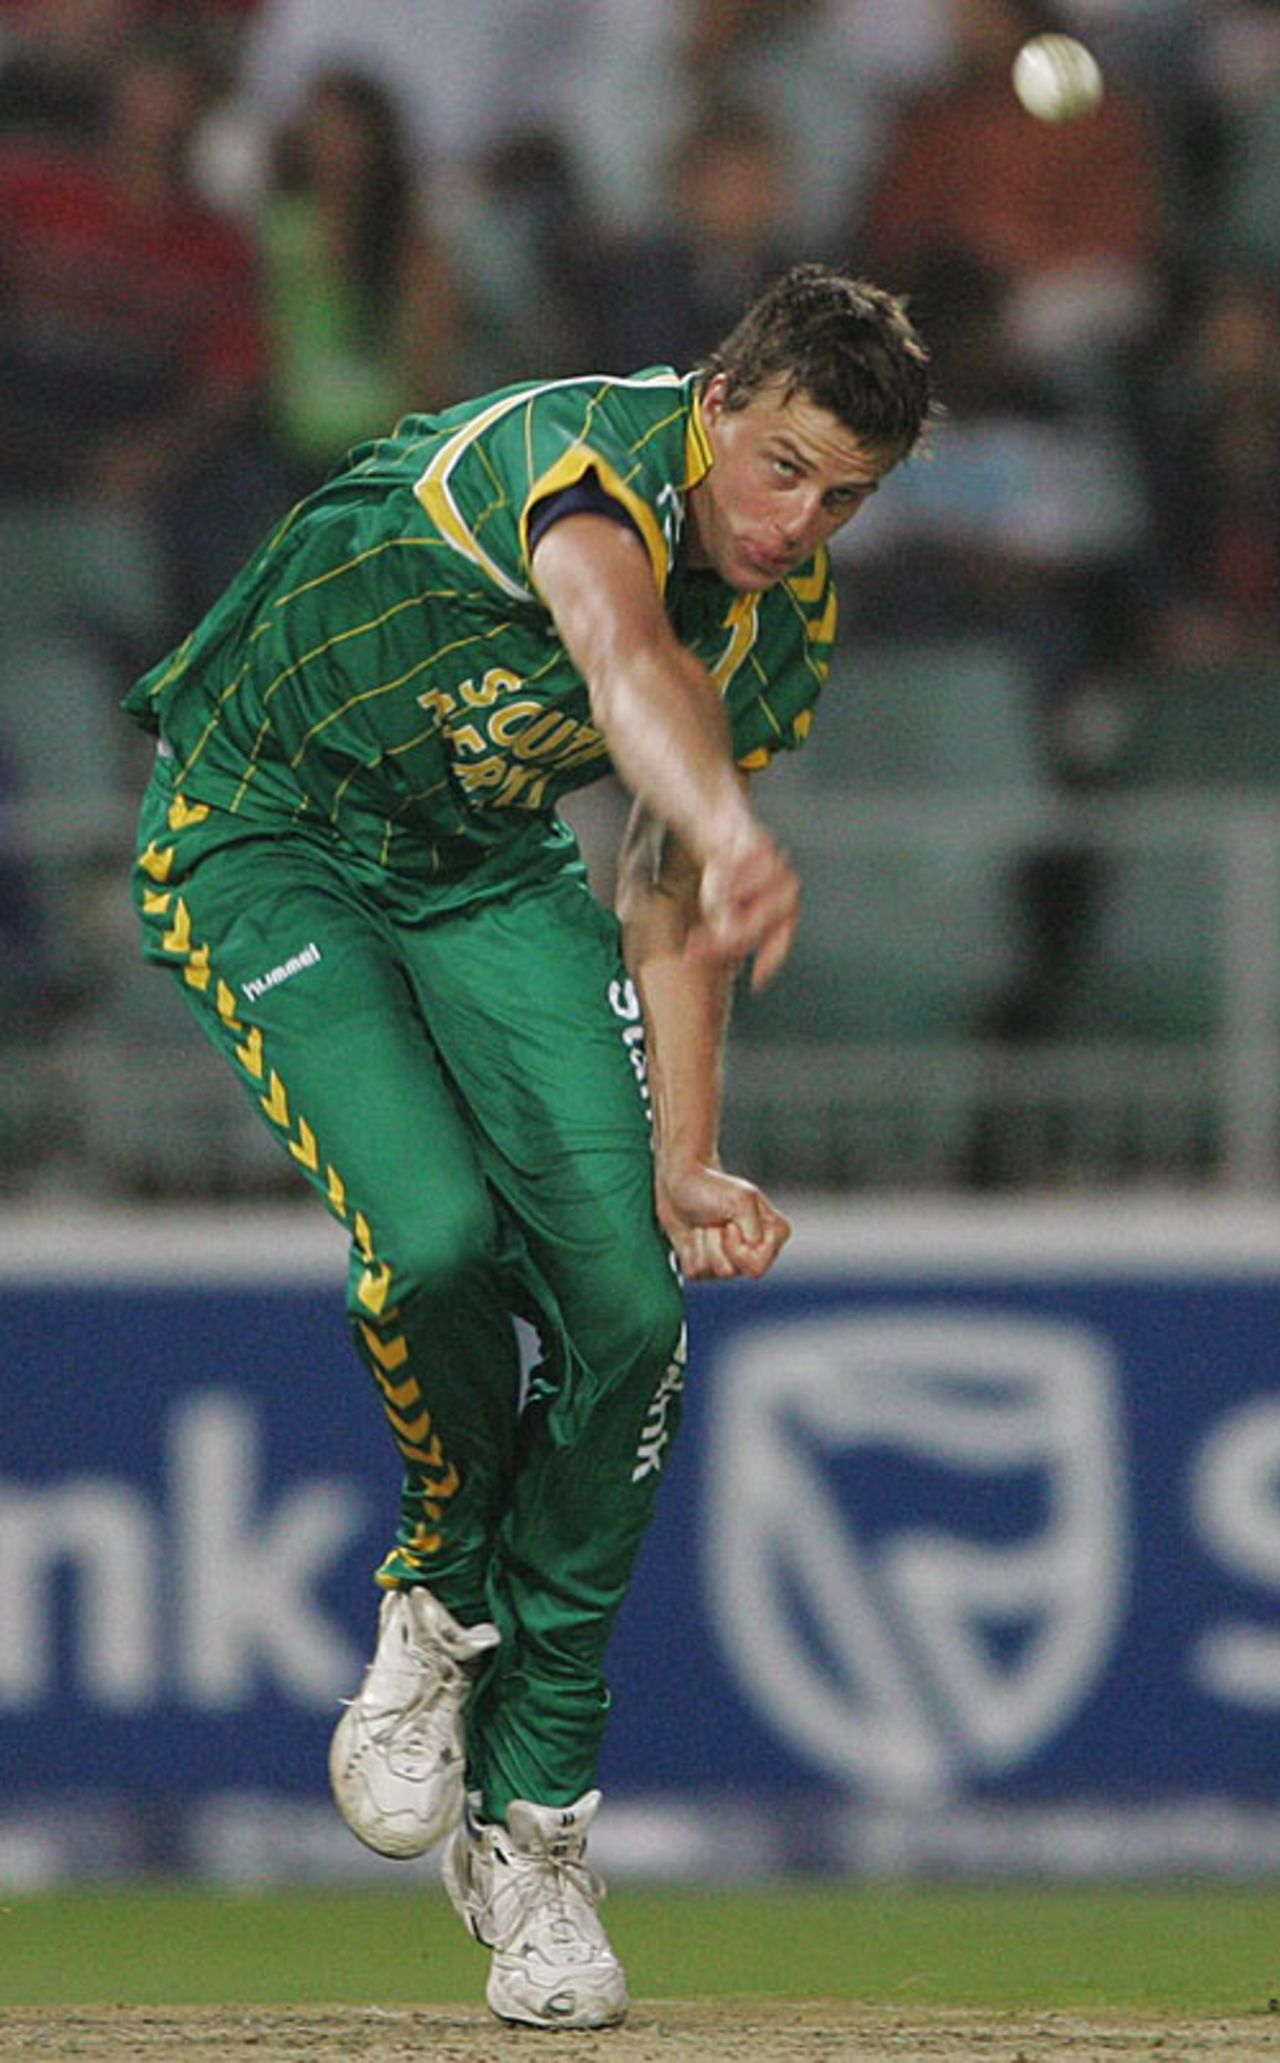 Morne Morkel sends down another delivery, South Africa v West Indies, 2nd Twenty20, Wanderers, January 18, 2008